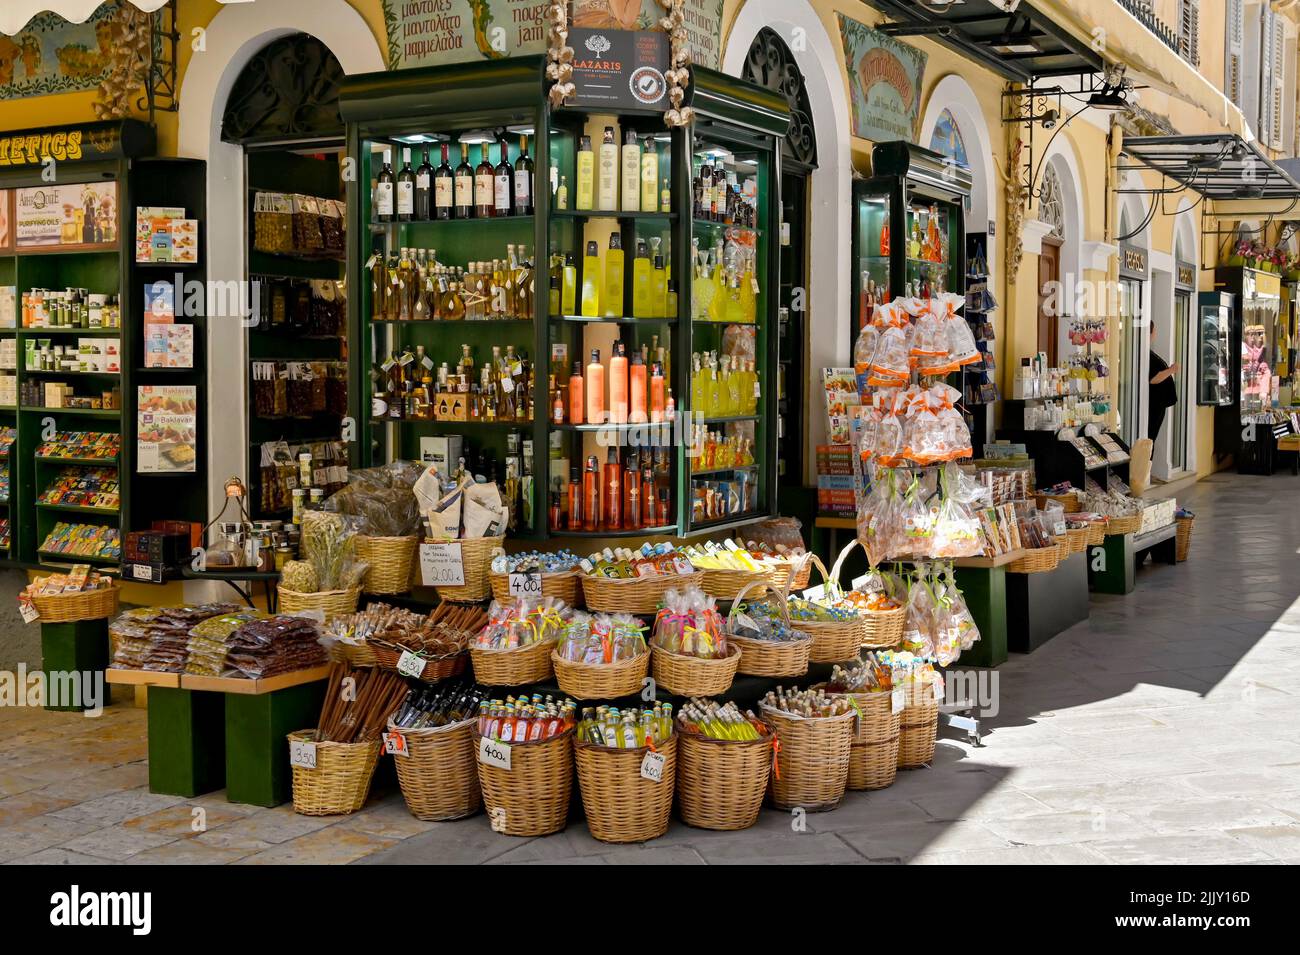 Corfu, Greece - June 2022: Goods on sale outside a food and drink shop in one of the narrow streets of the old part of Corfu town Stock Photo